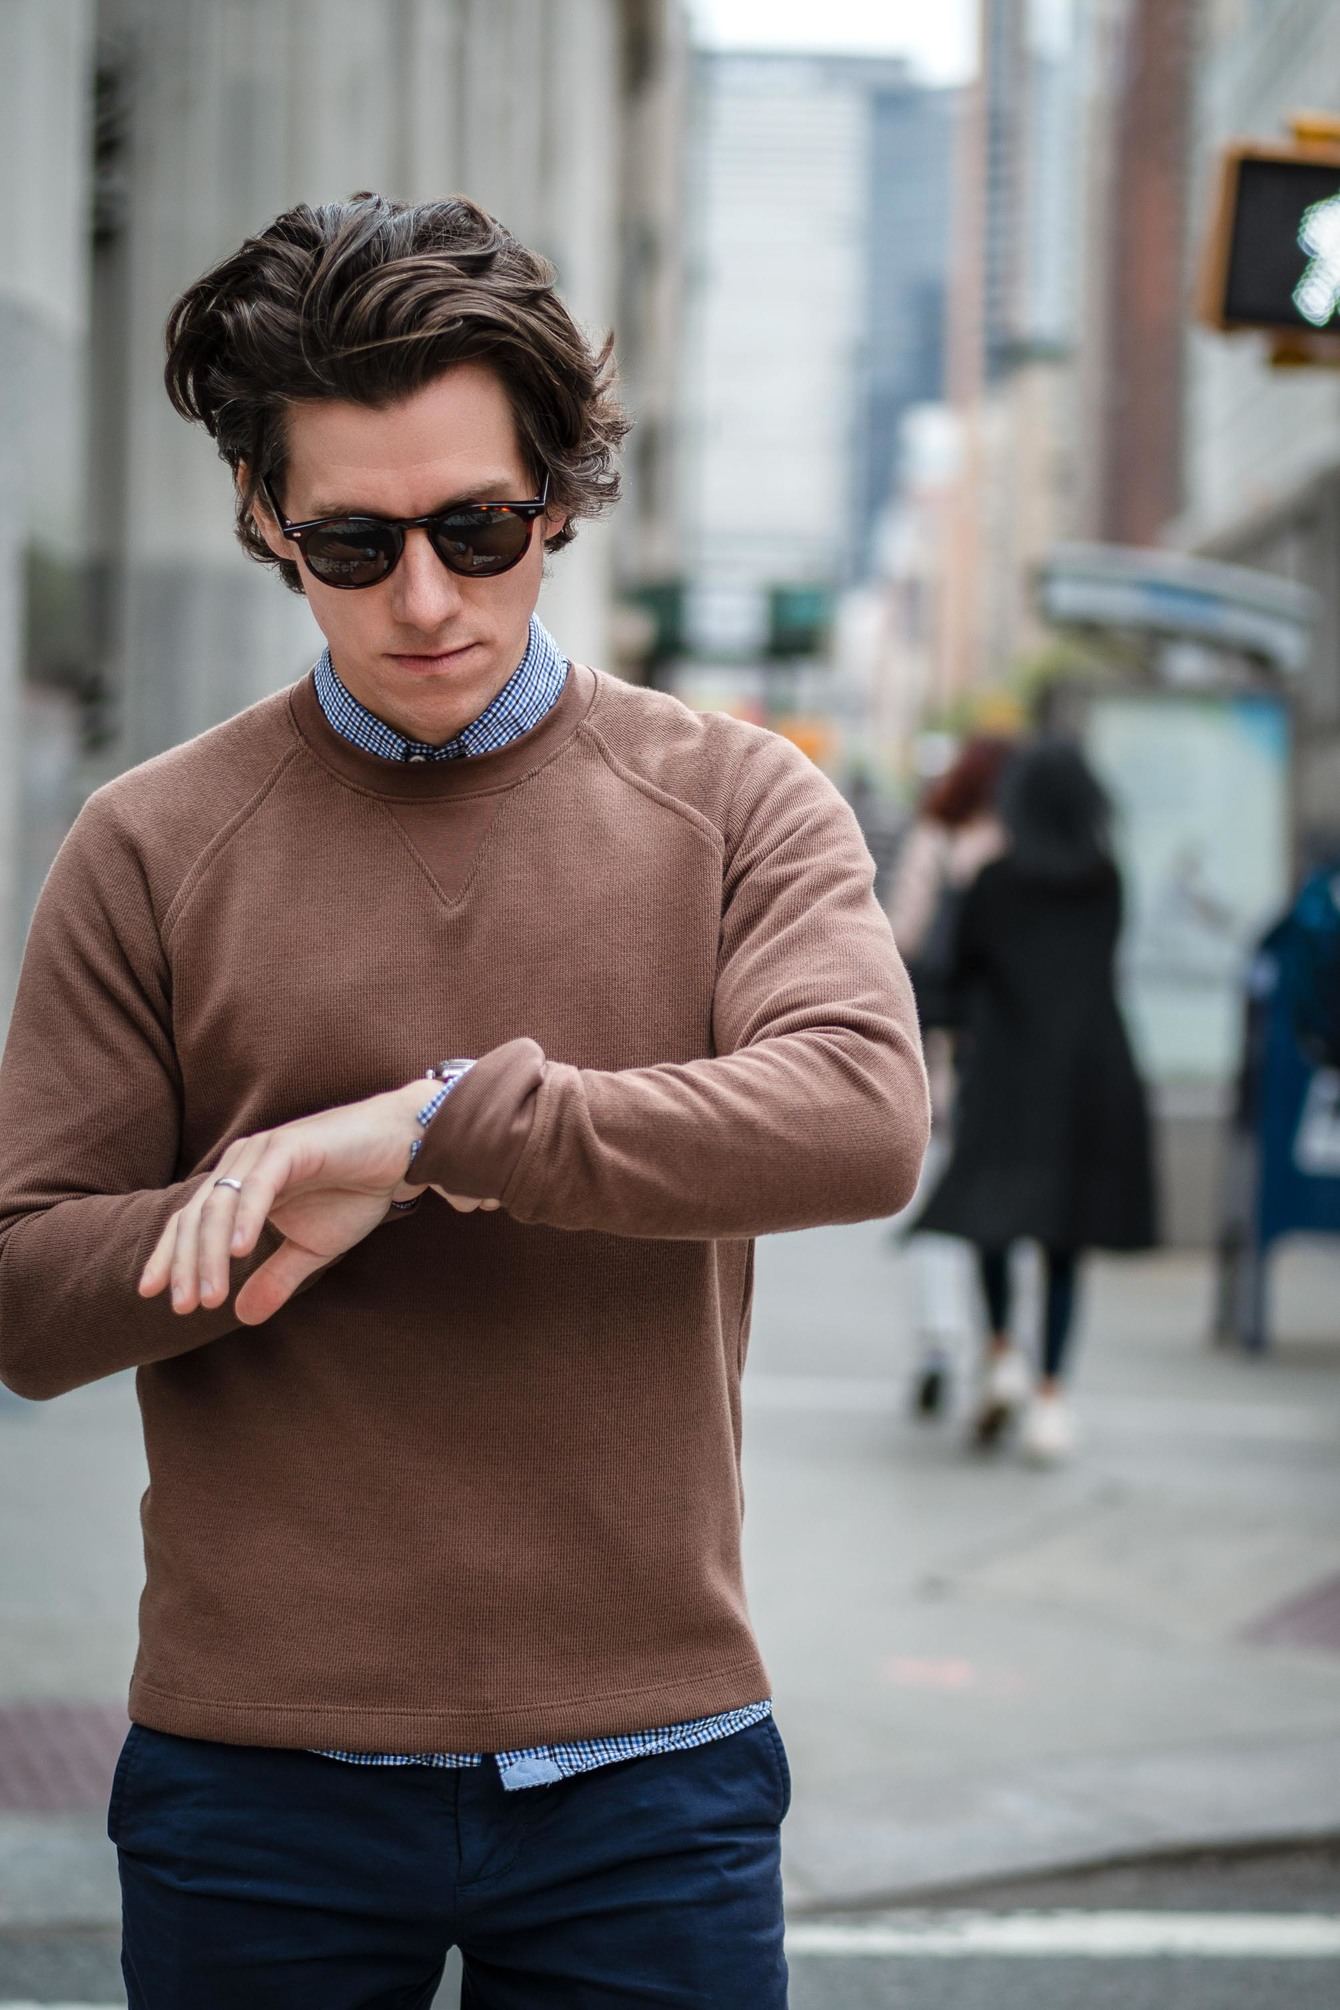 Brown cotton sweater